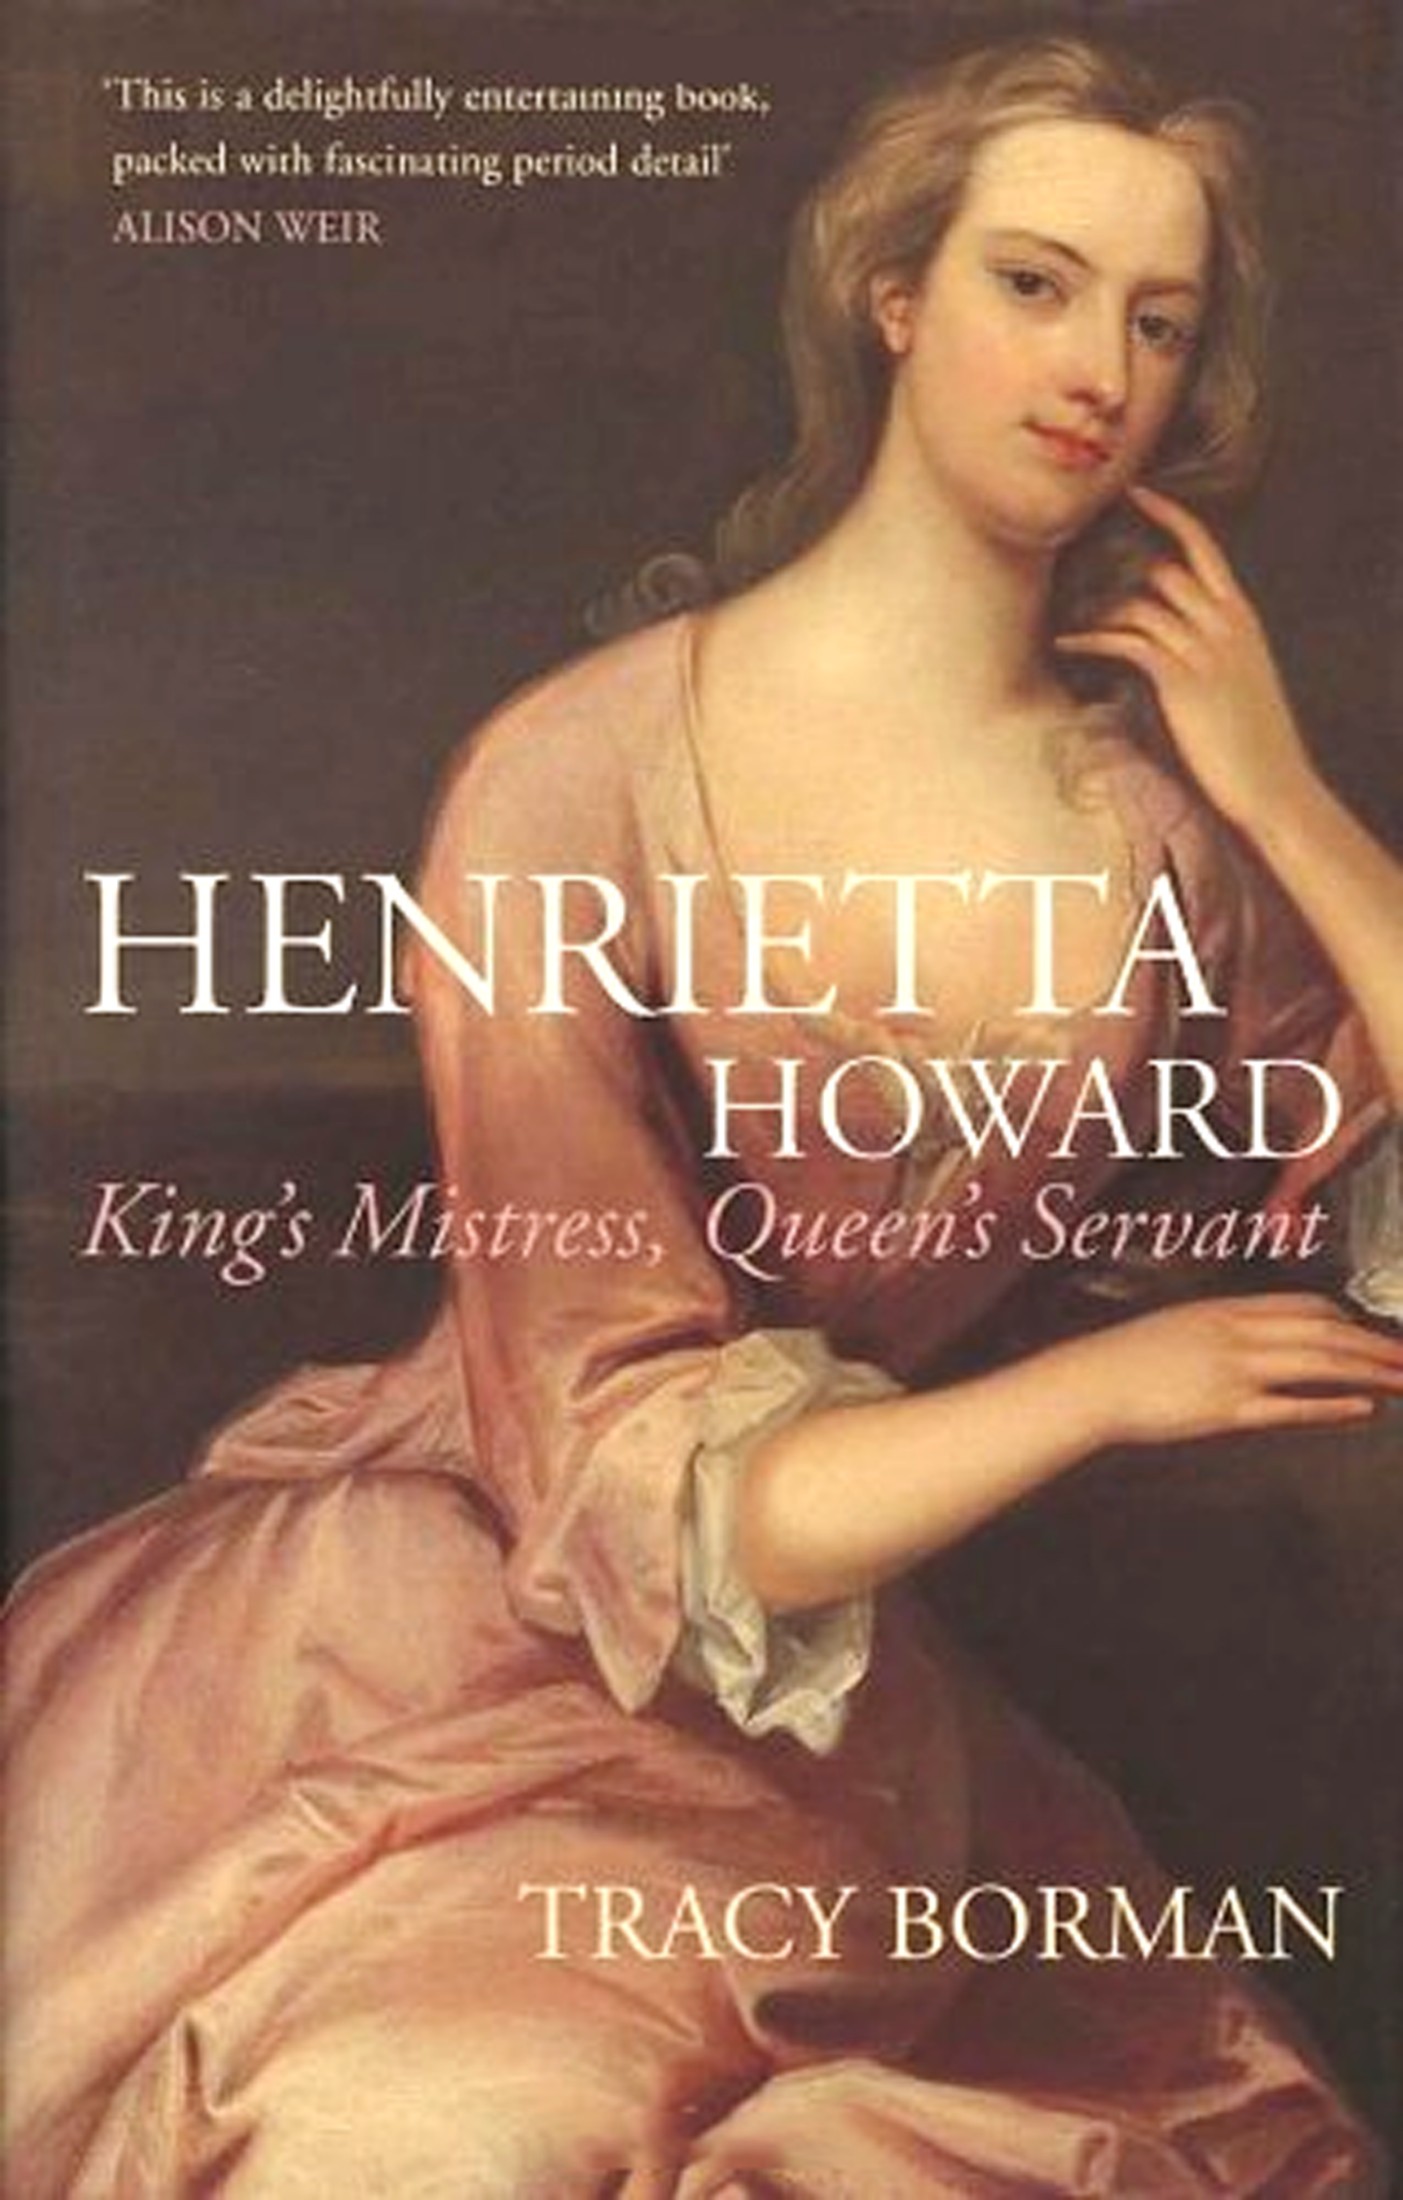 King's Mistress, Queen's Servant: The Life and Times of Henrietta Howard